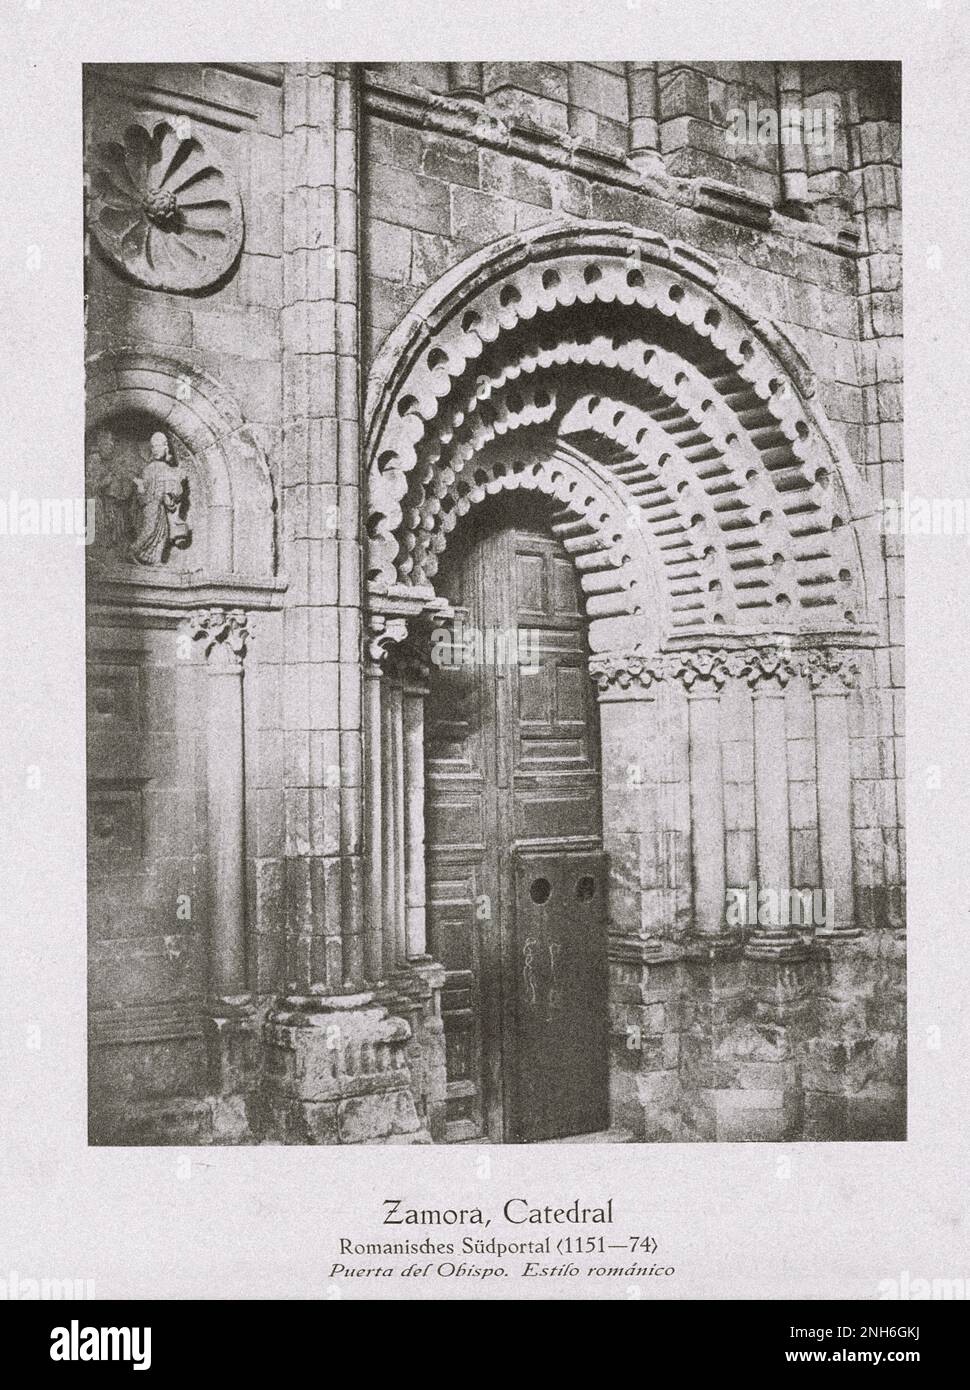 Architecture of Old Spain. Vintage photo of Zamora Cathedral. Castile and León Romanesque southern portal (1151-1174). The Cathedral of Zamora is a Catholic cathedral in Zamora, in Castile and León, Spain, located above the right bank of the Duero It remains surrounded by its old walls and gates. Stock Photo